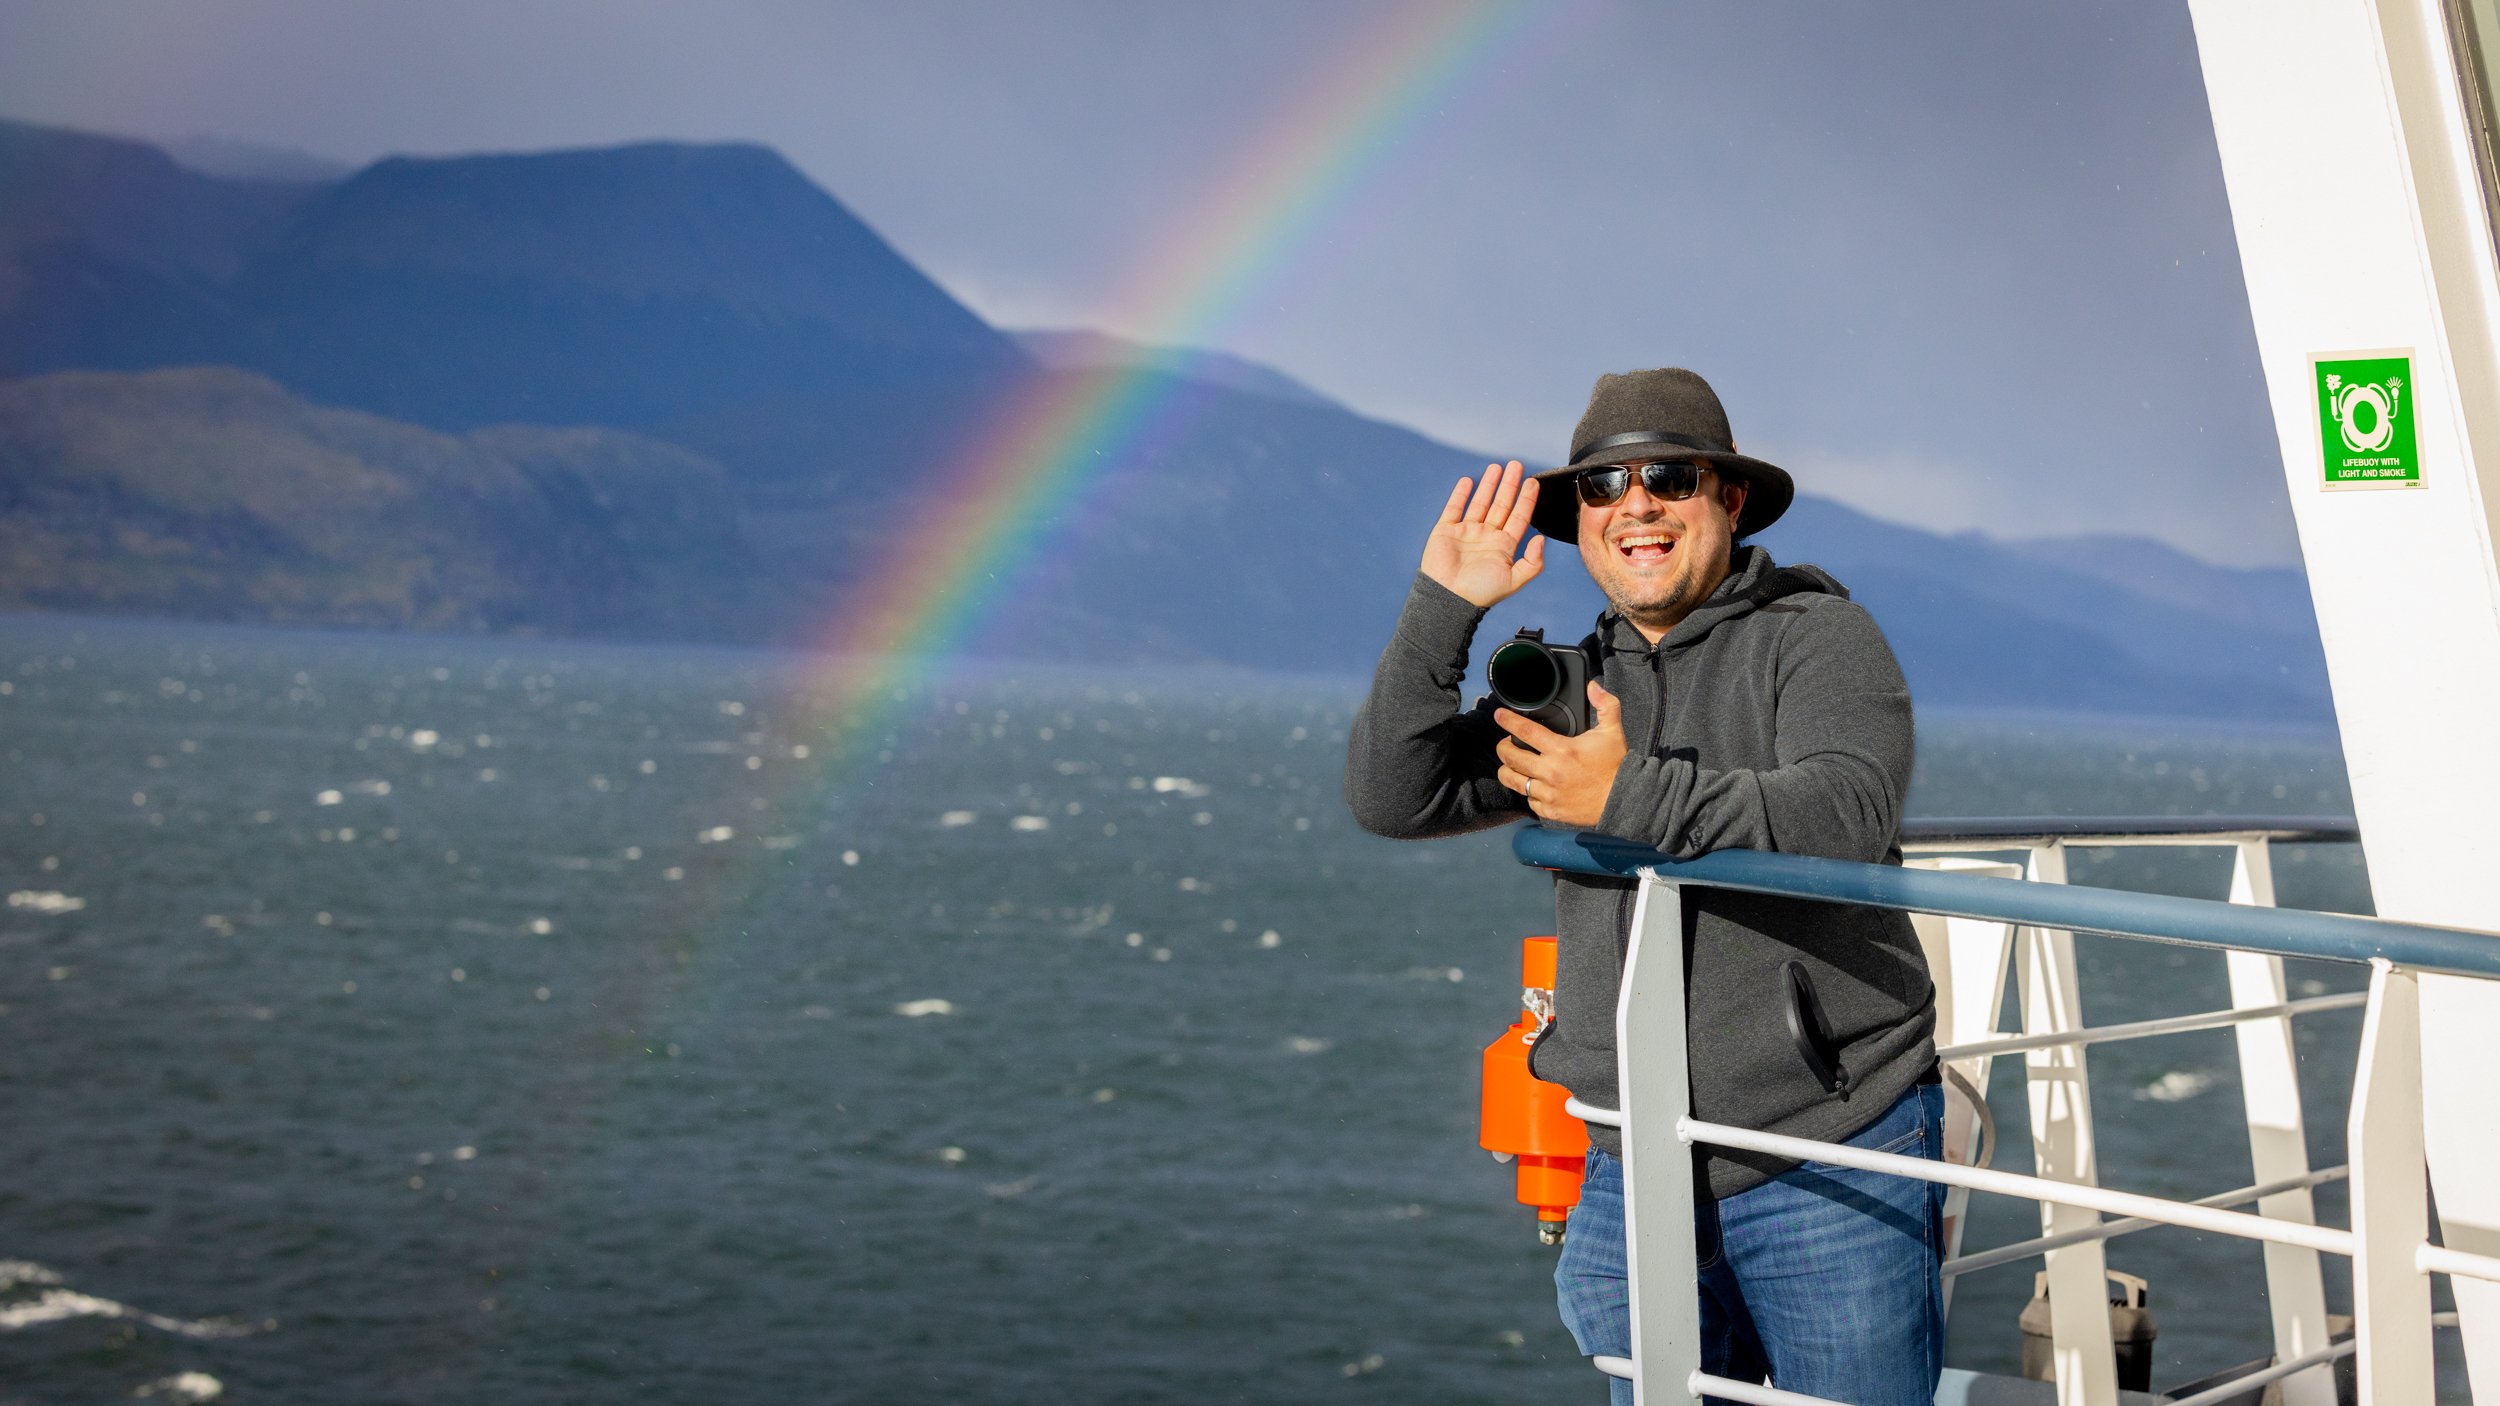 Antarctica_TravelingJules_Departing Ushuaia_Rainbow and Friends_239A9487_2500px.jpg